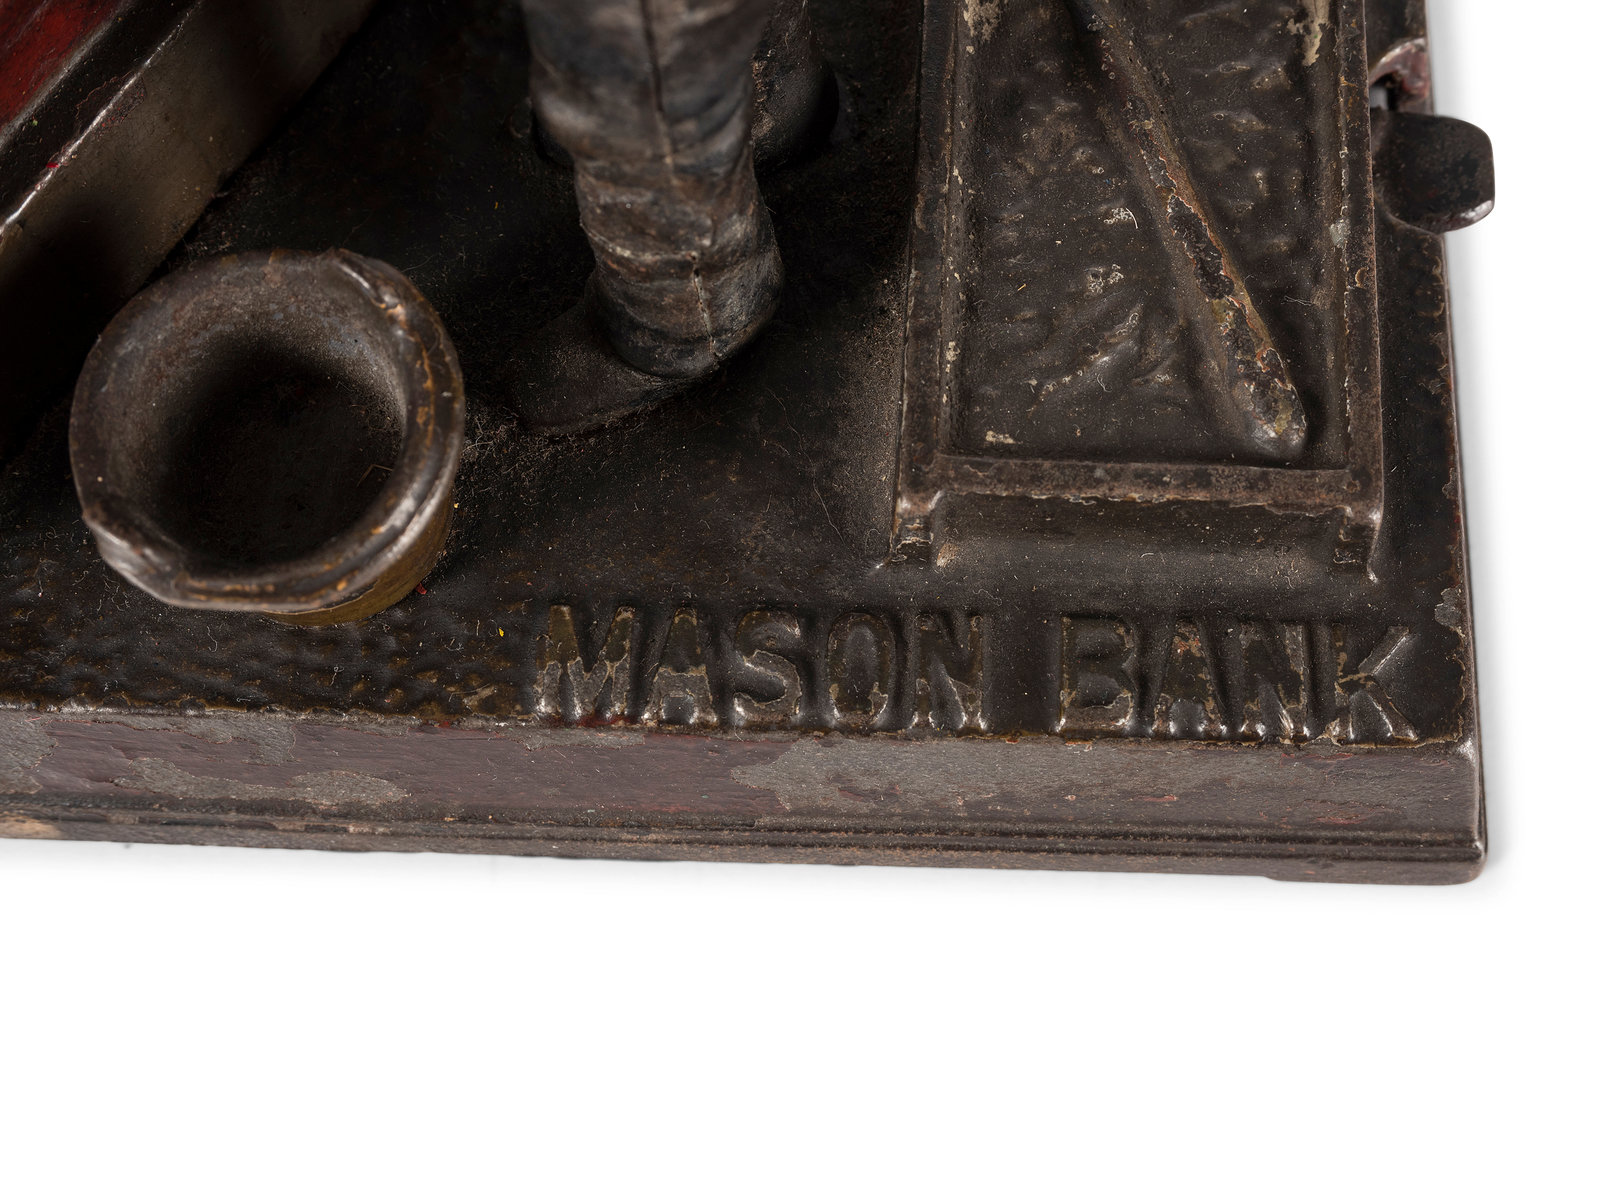 Cast Iron Toy Bank: Masons, c. 1937. Creator available as Framed